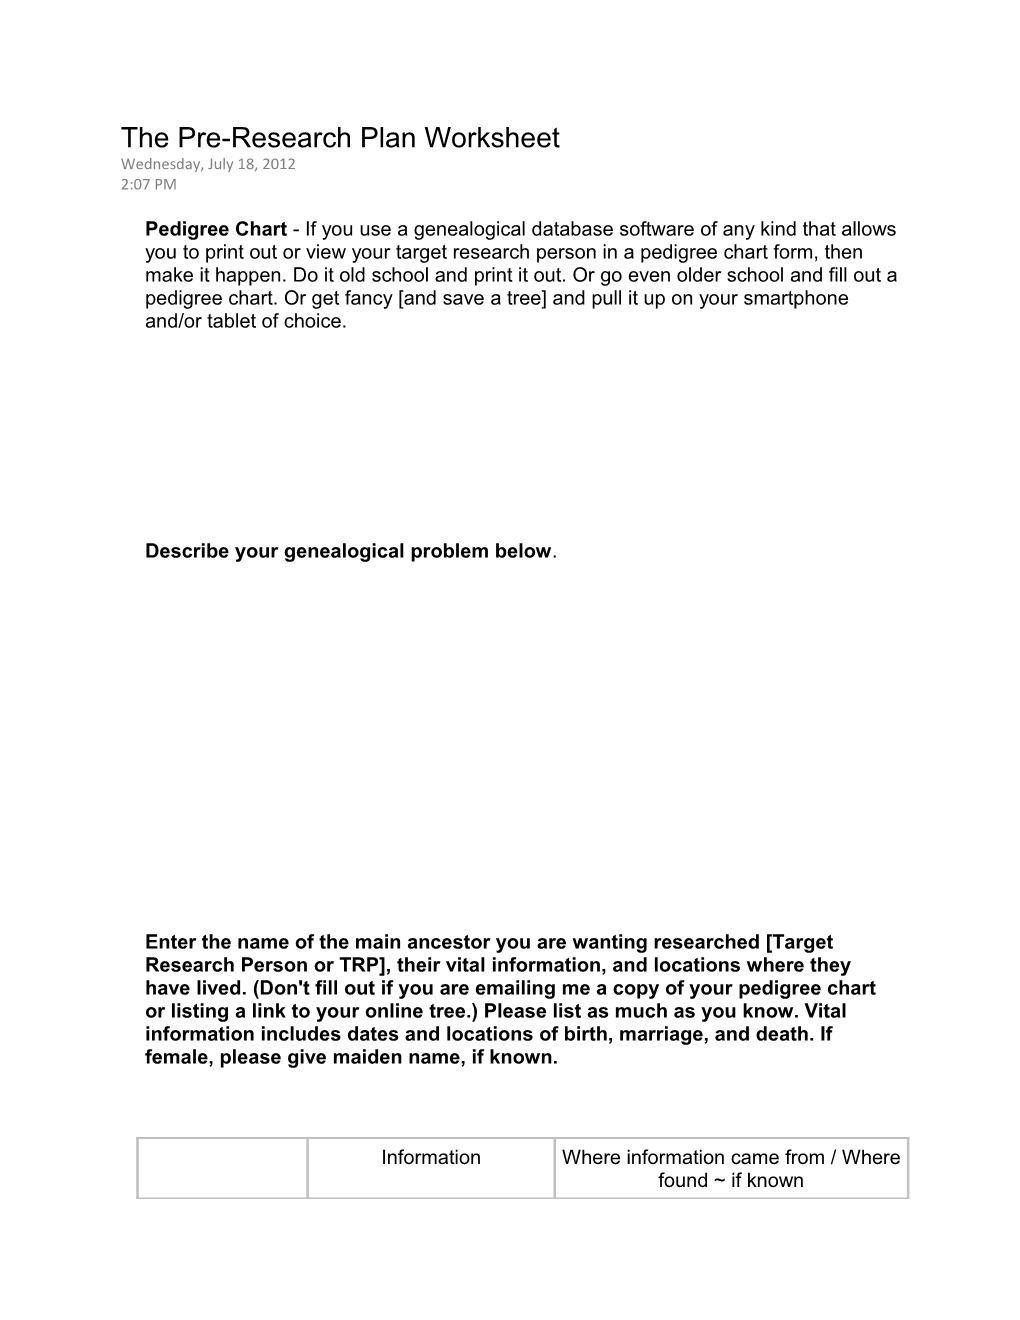 The Pre-Research Plan Worksheet